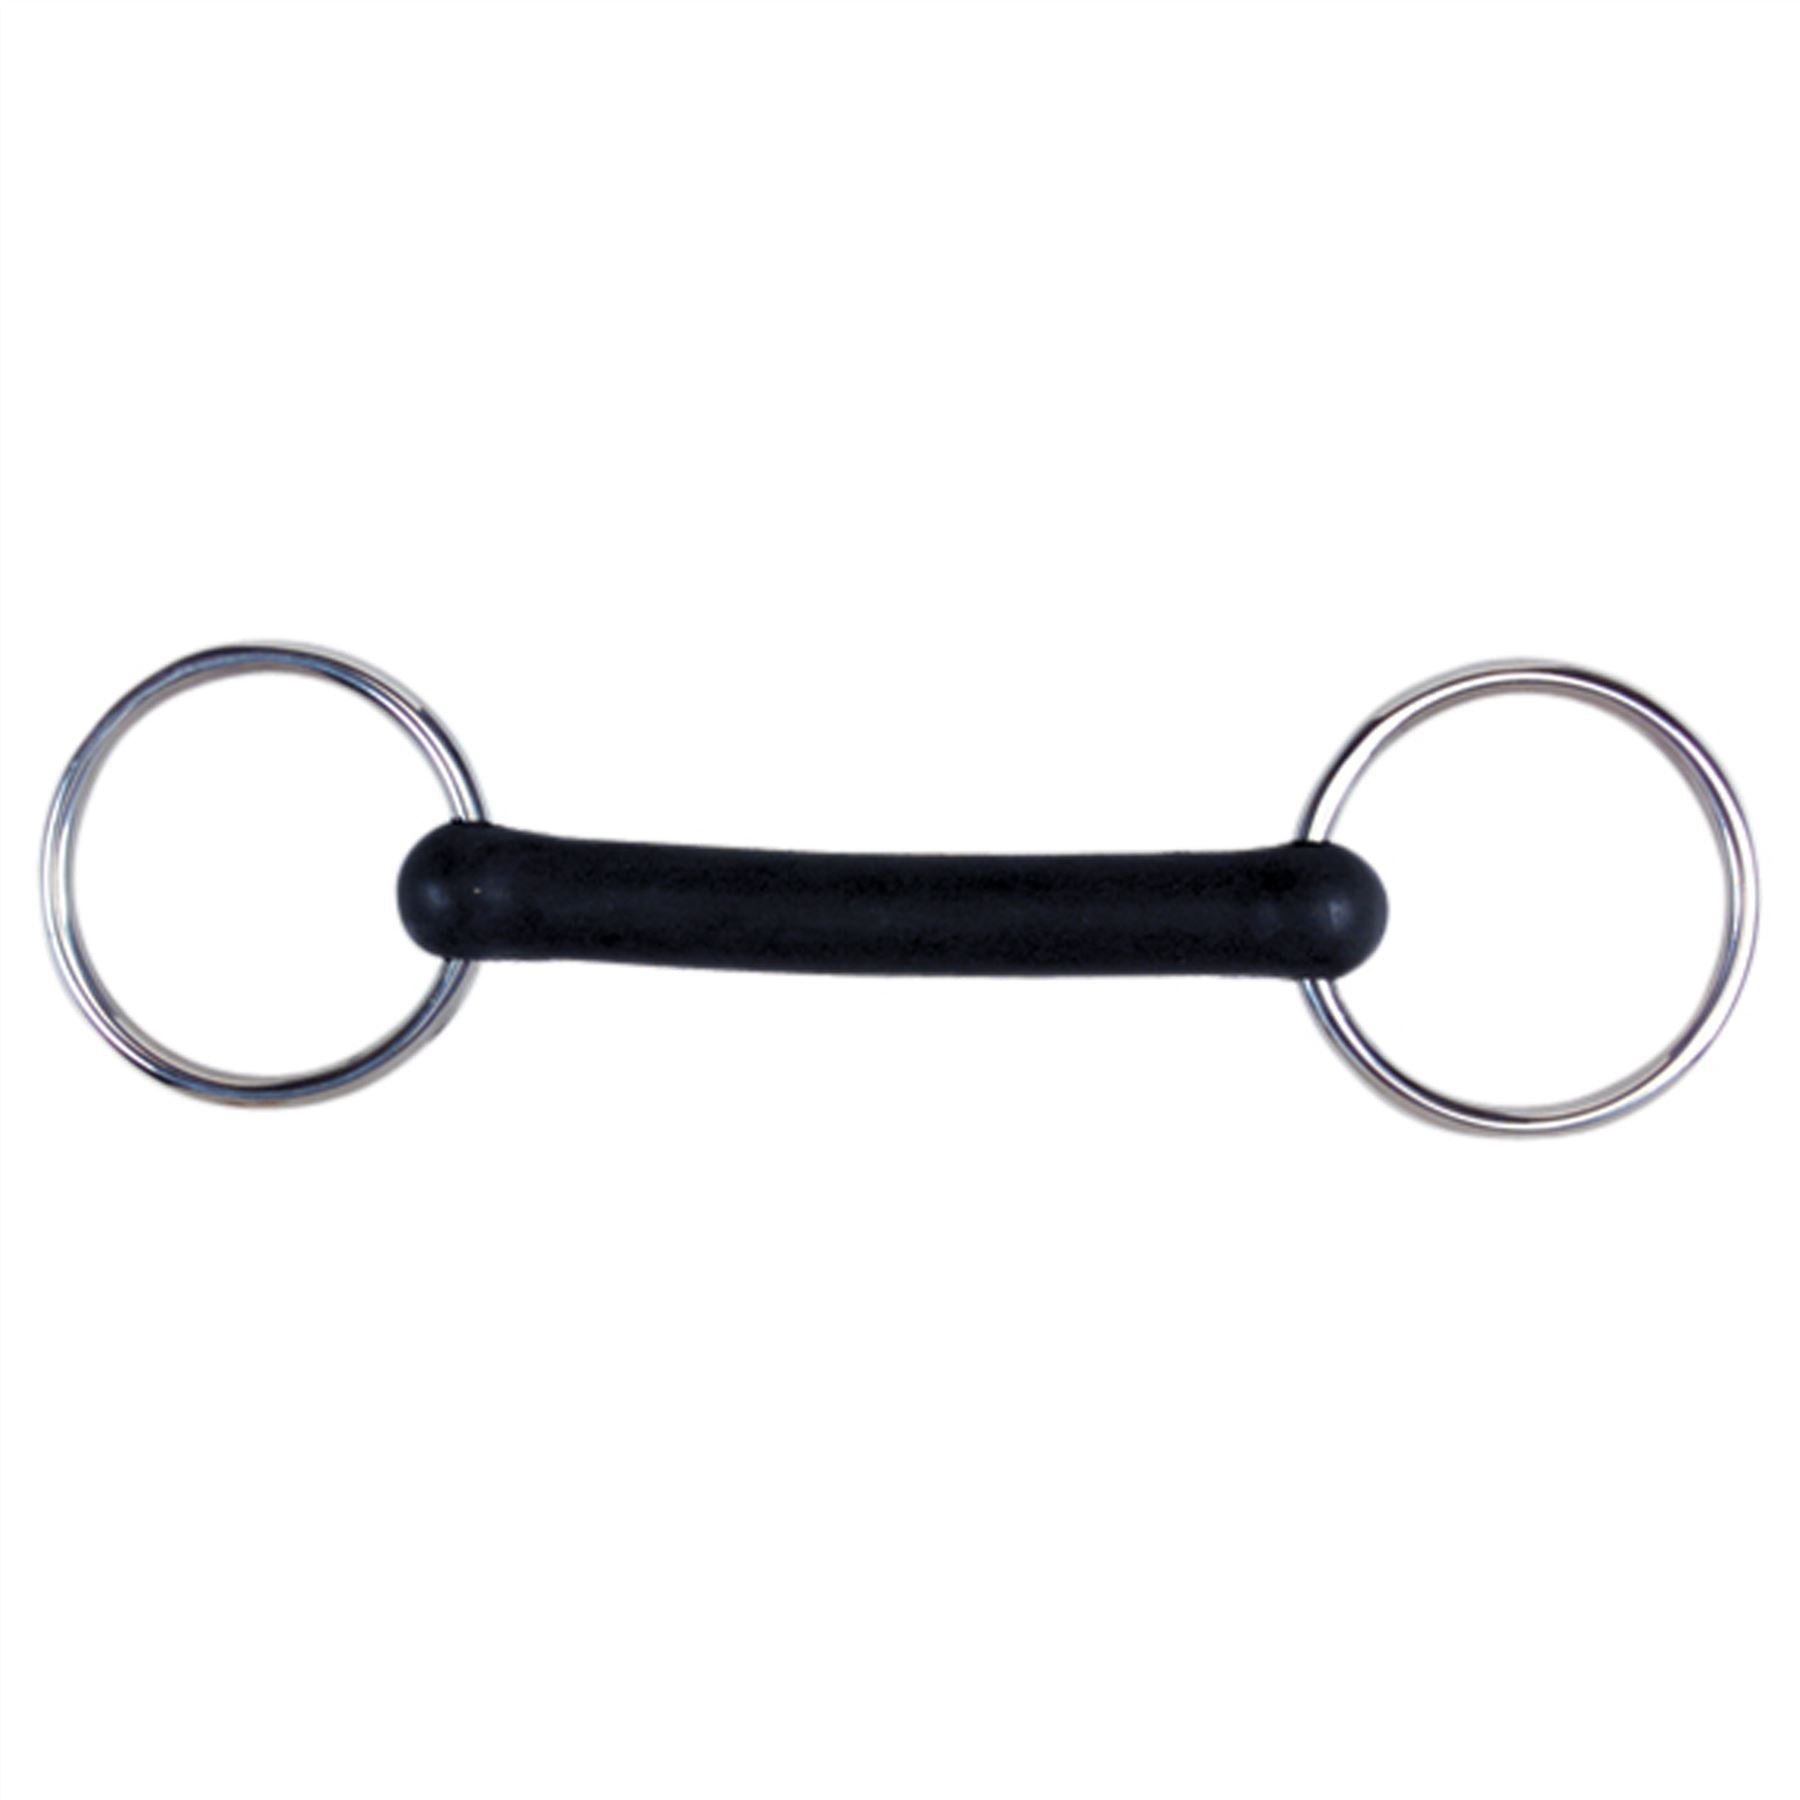 Korsteel Flexible Rubber Loose Ring Mullen Mouth Snaffle - Just Horse Riders